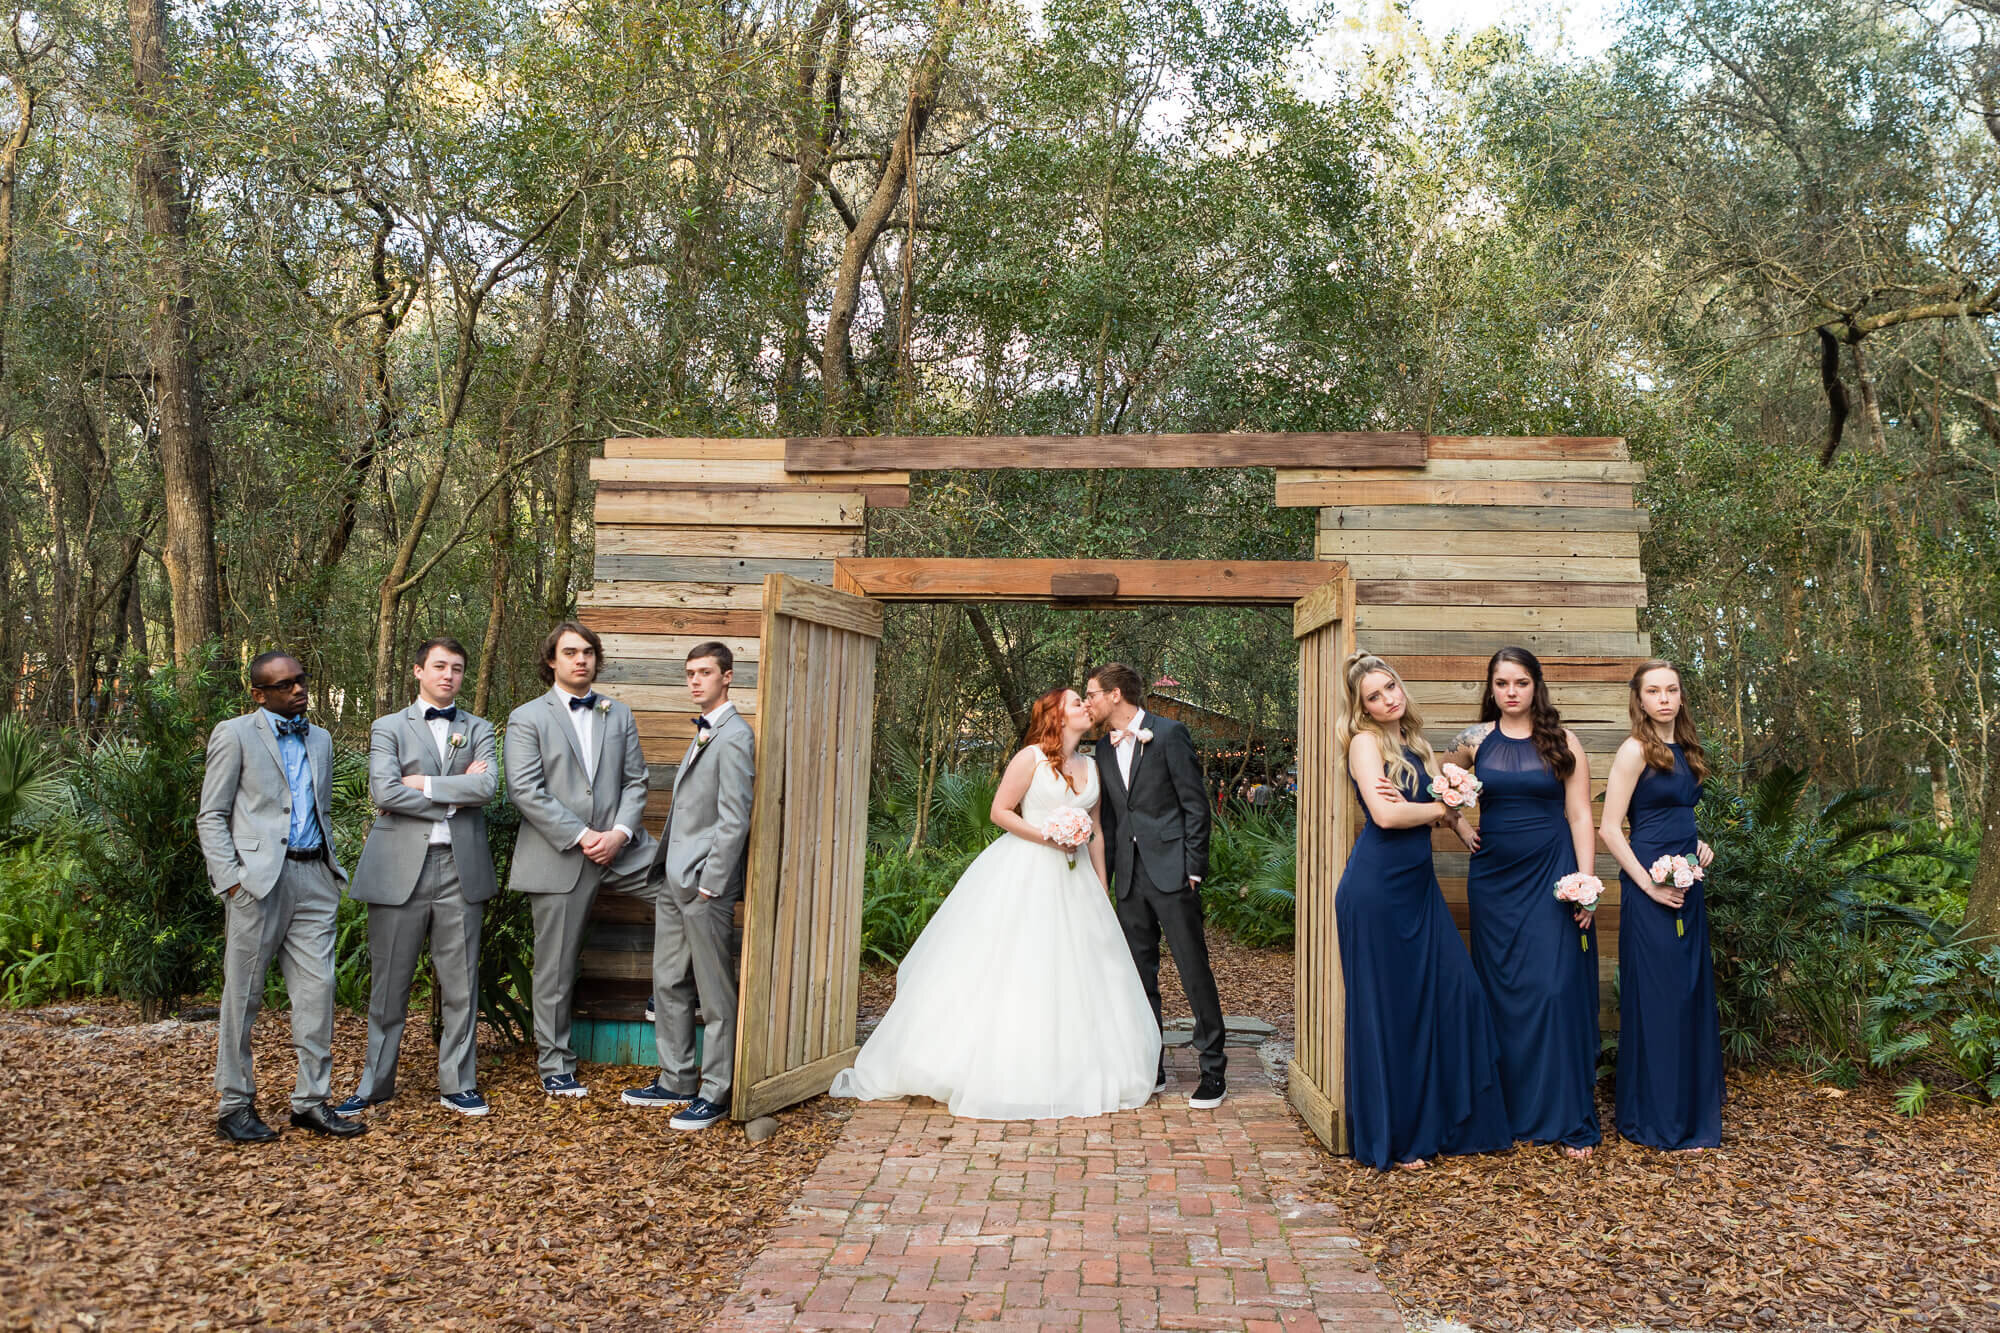  Taylor and Will's wedding at Deland's Bridle Oaks Barn 